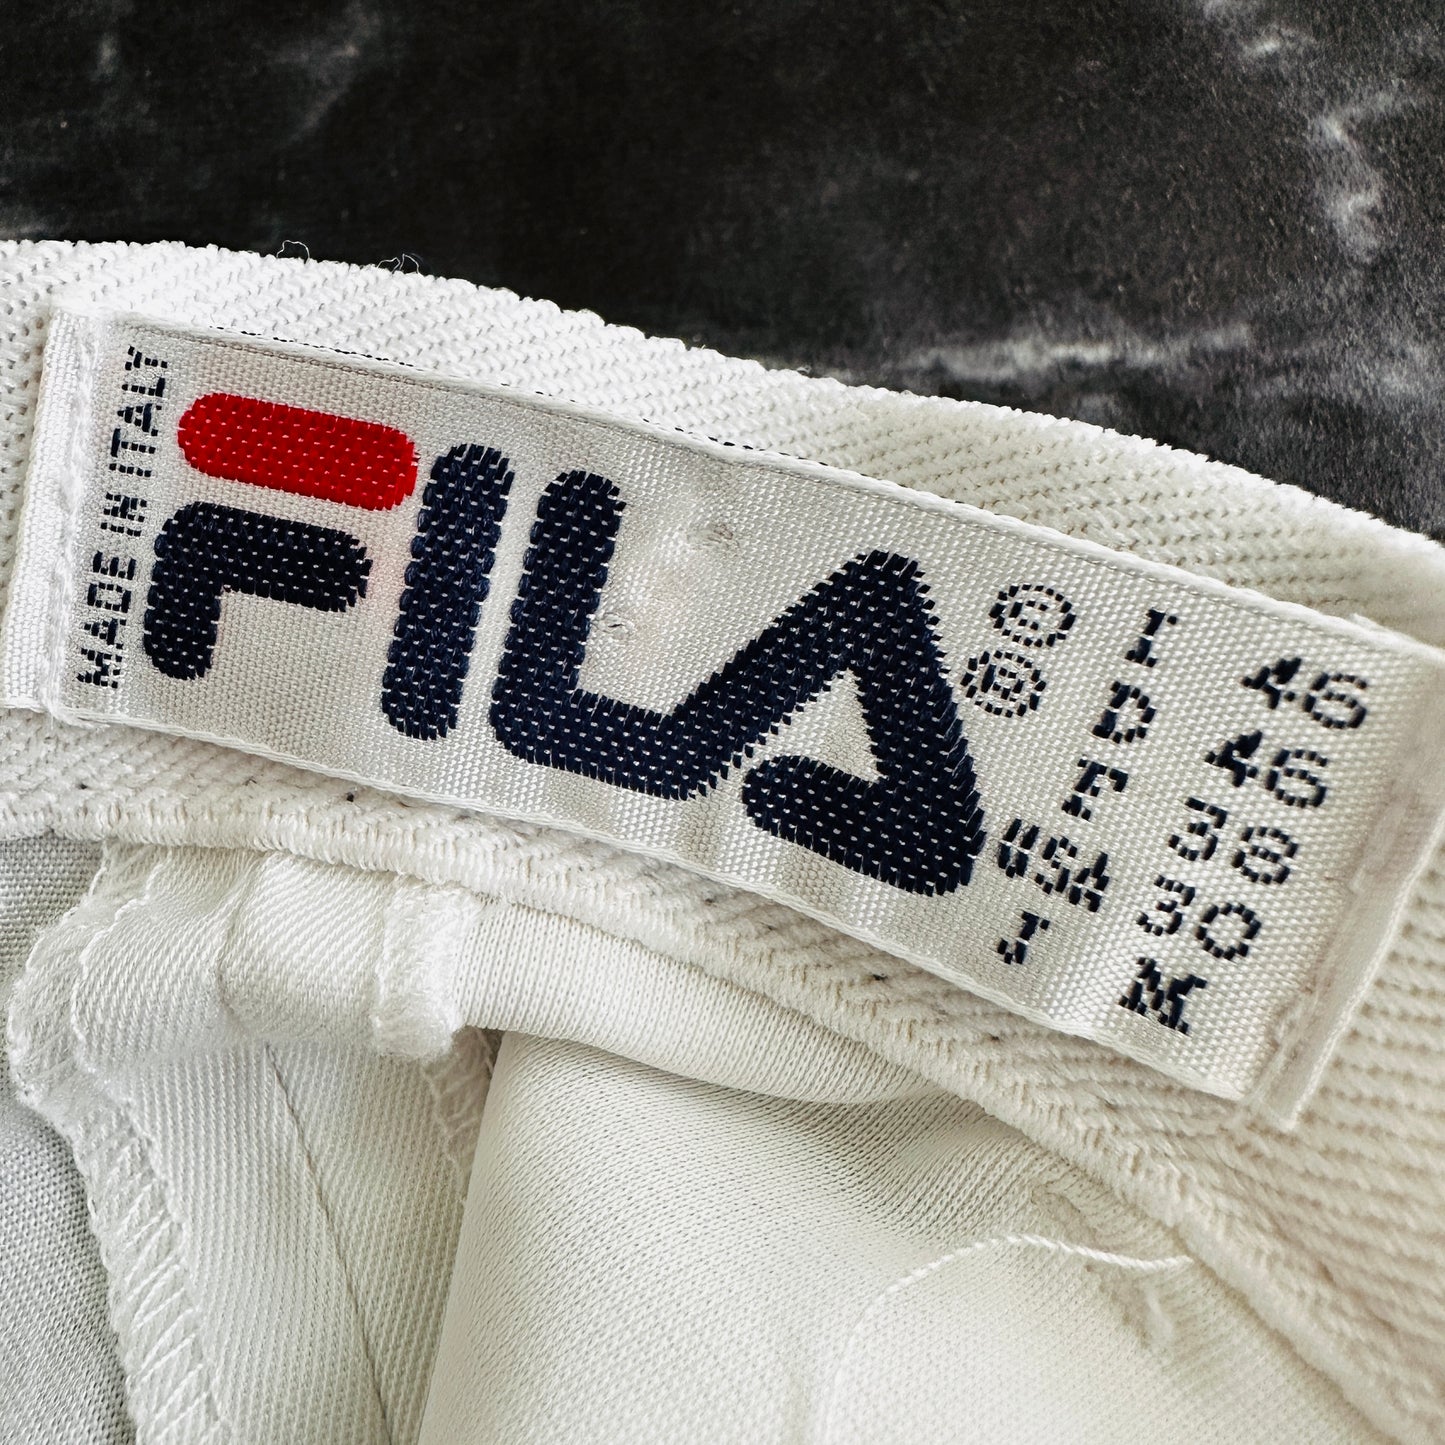 Fila Vintage 80s Tennis Shorts - 48 /M - Made in Italy